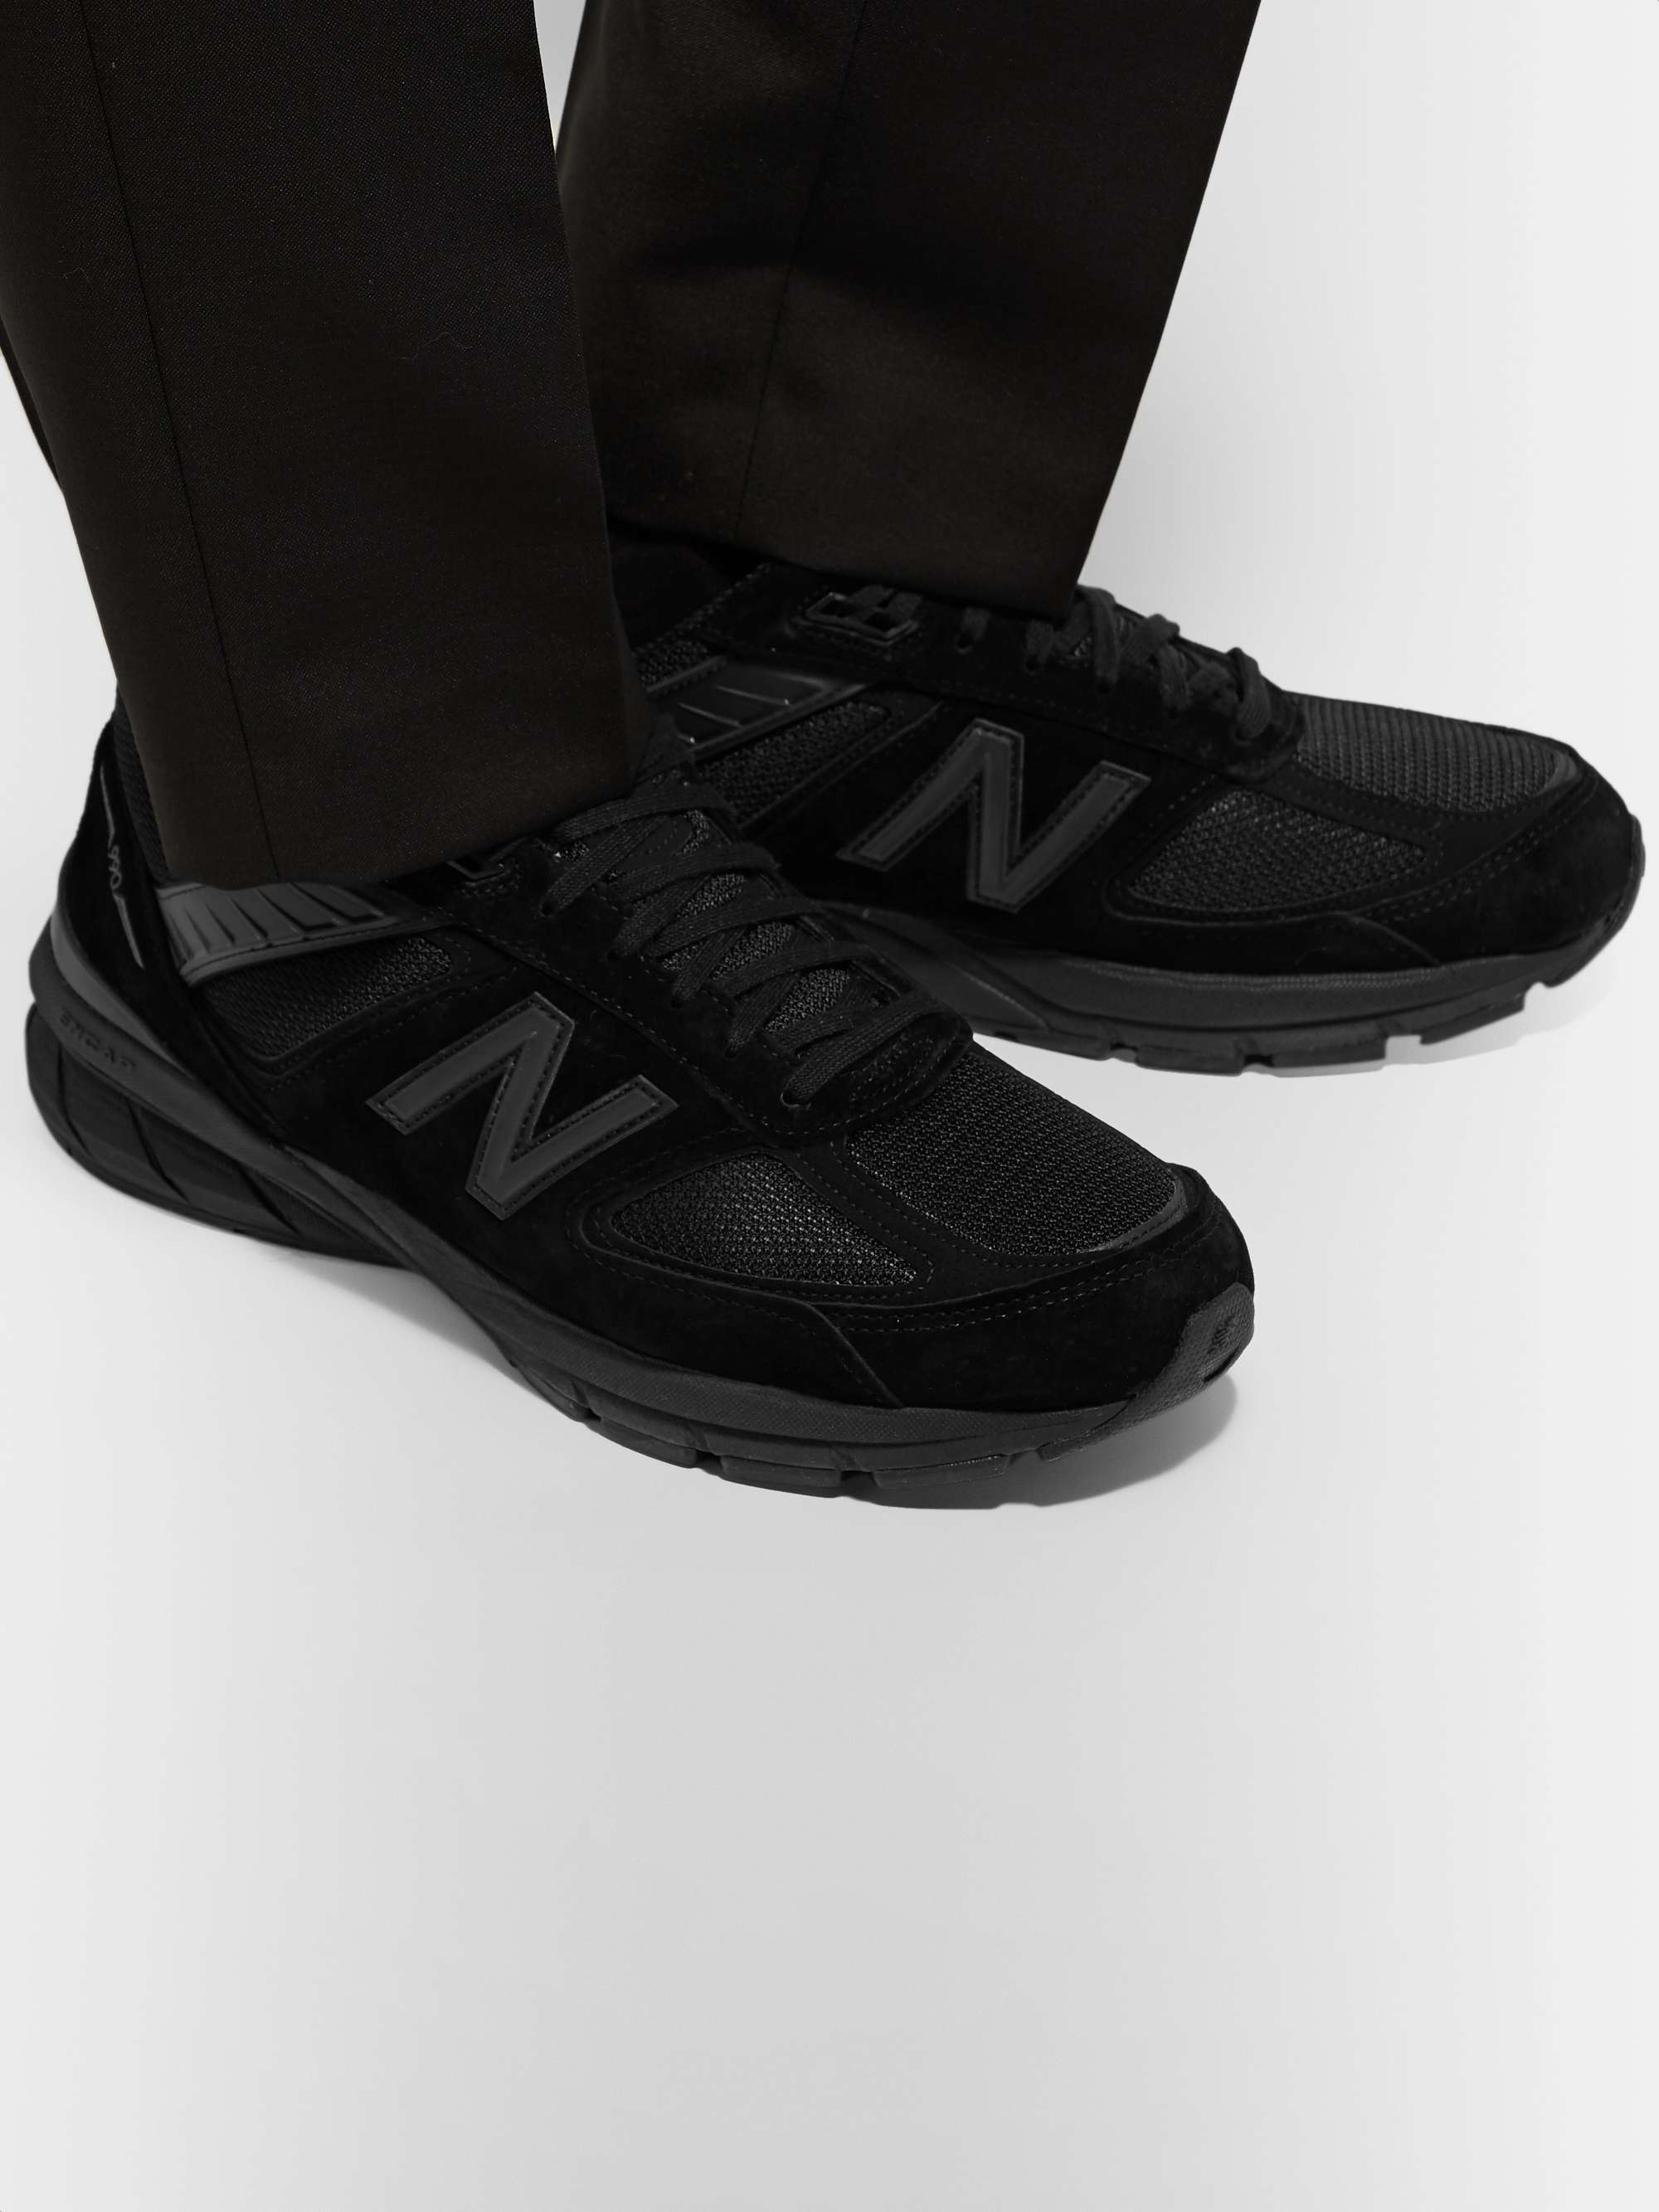 NEW BALANCE M990v5 Rubber-Trimmed Suede and Mesh Running Sneakers